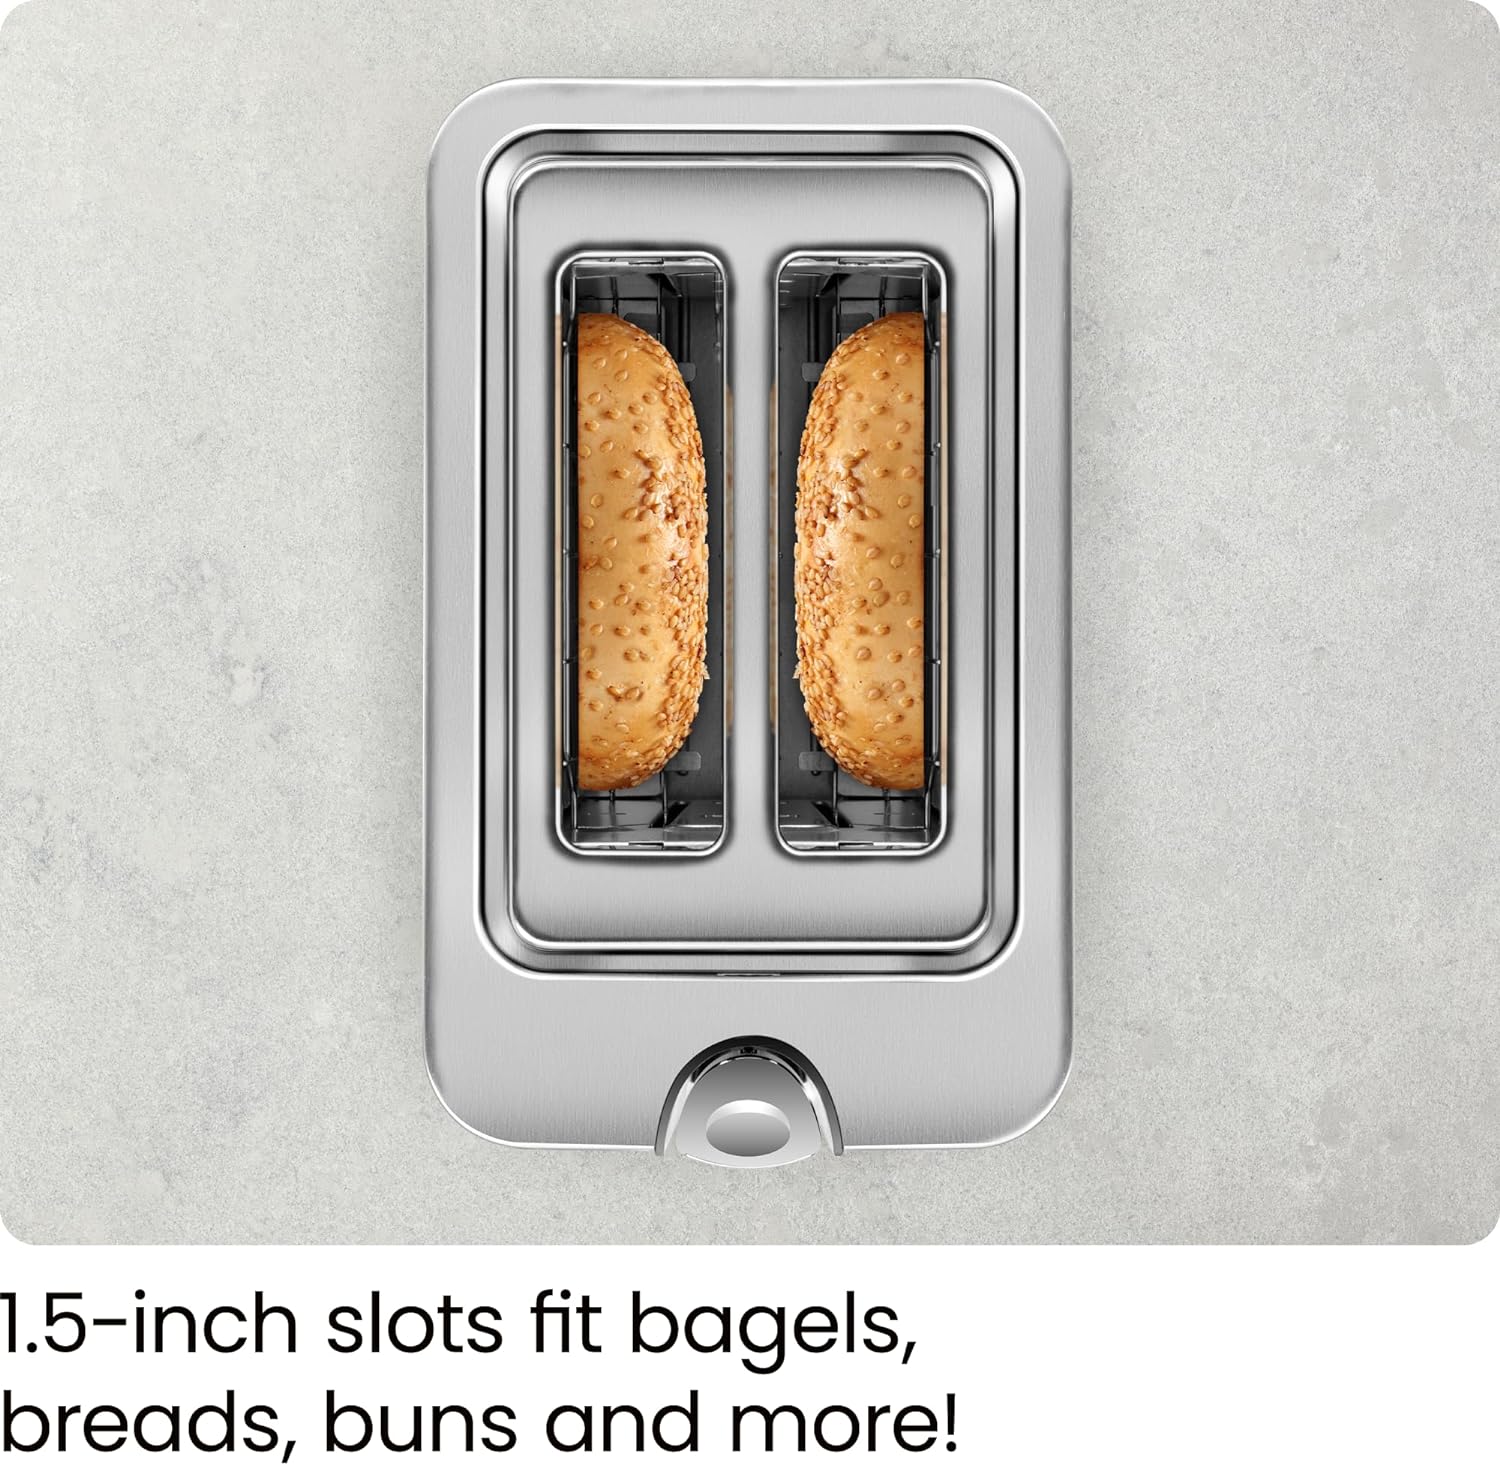 Chefman 2 Slice Toaster, 7 Shade Settings, Stainless Steel Toaster 2 Slice with Extra-Wide Slots, Thick Bread Toaster and Bagel Toaster, Reheat, Defrost, Cancel, Lift Lever, Removable Crumb Tray